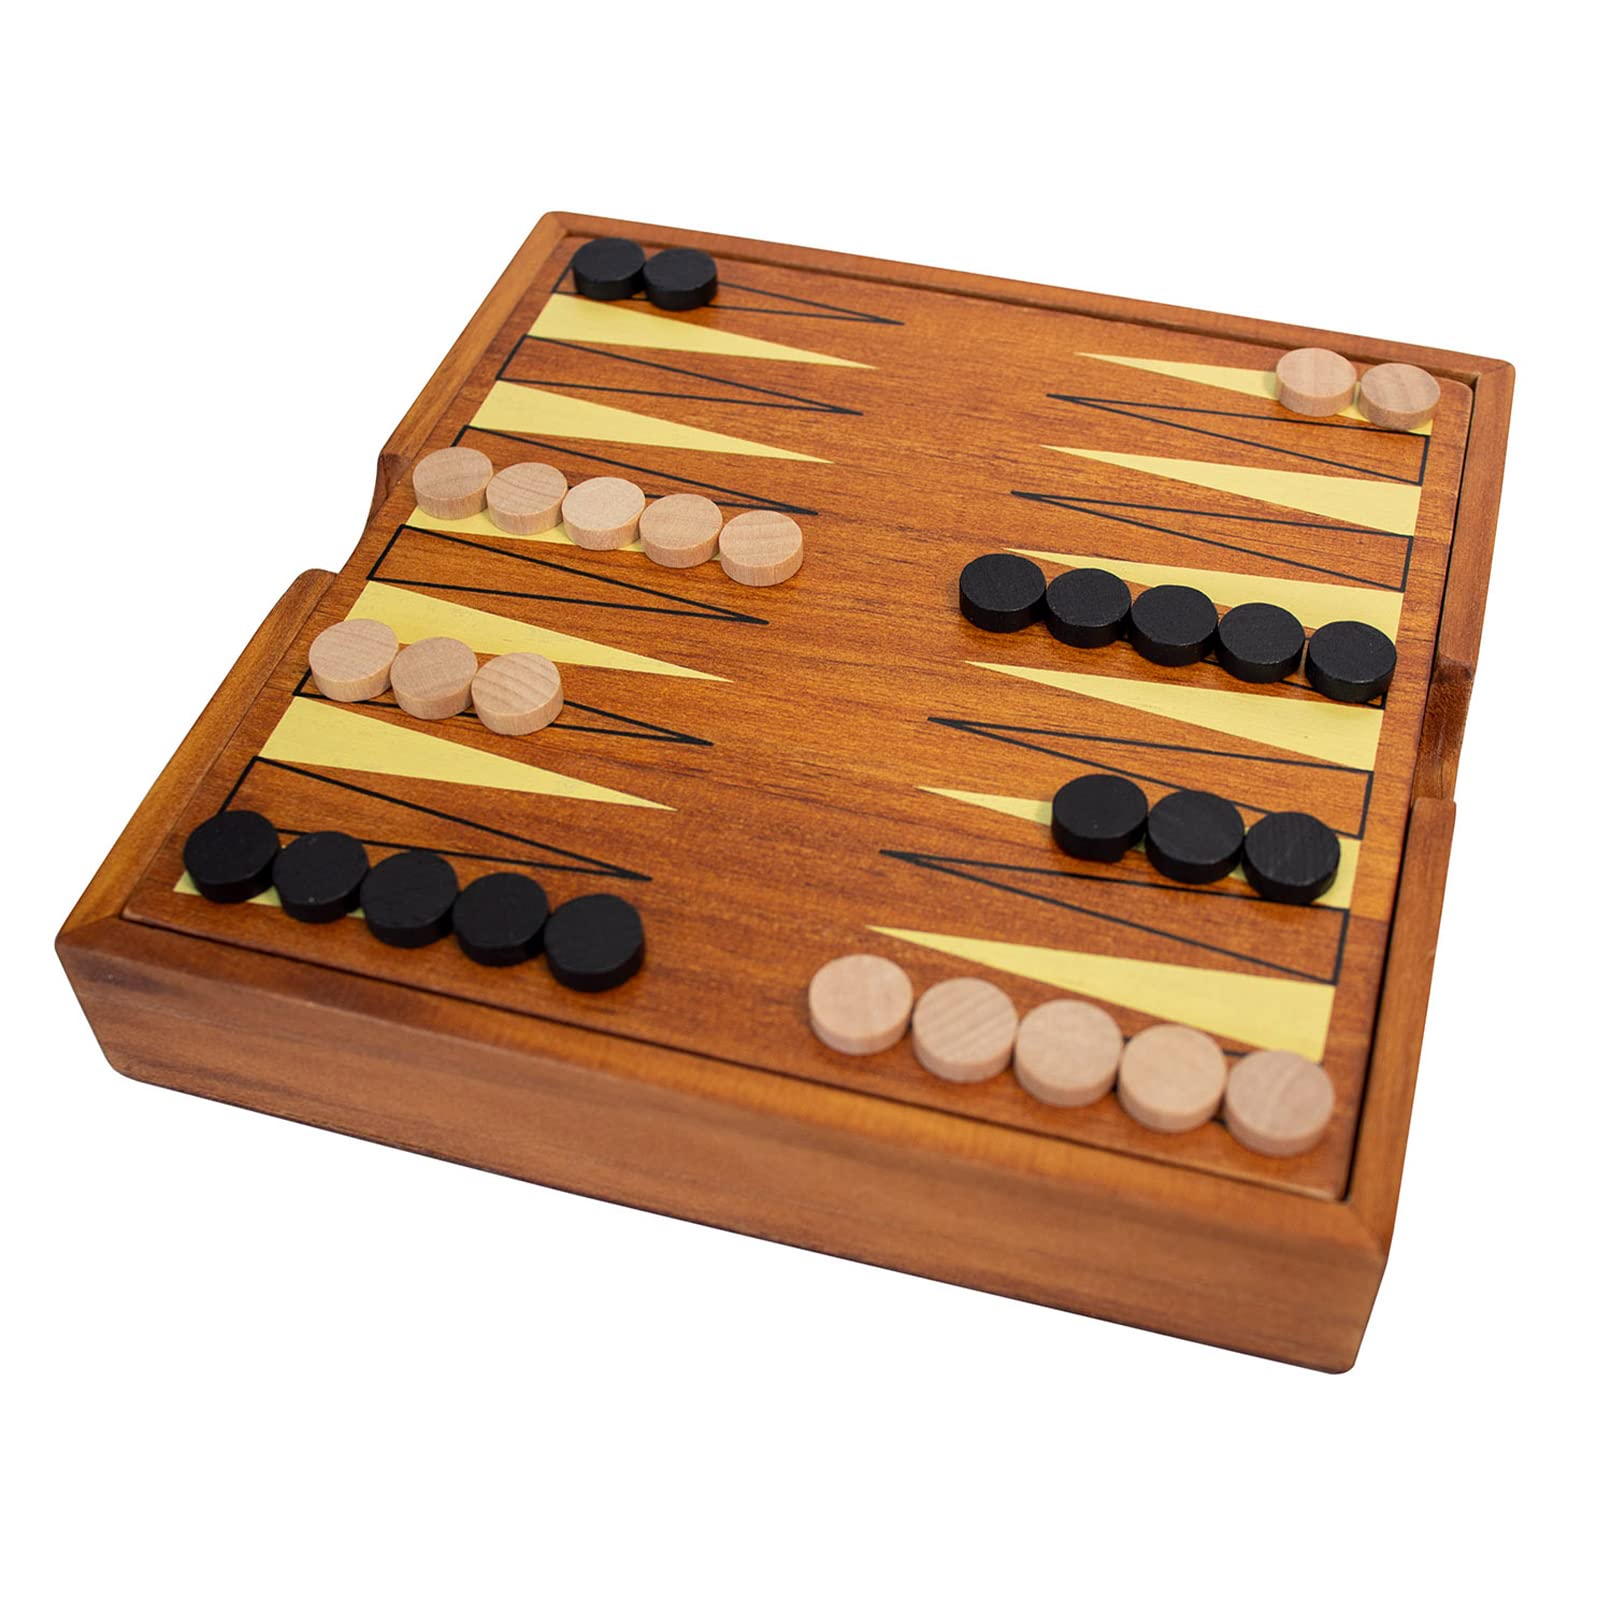 Deluxe Wooden Backgammon game with storage compartment. 